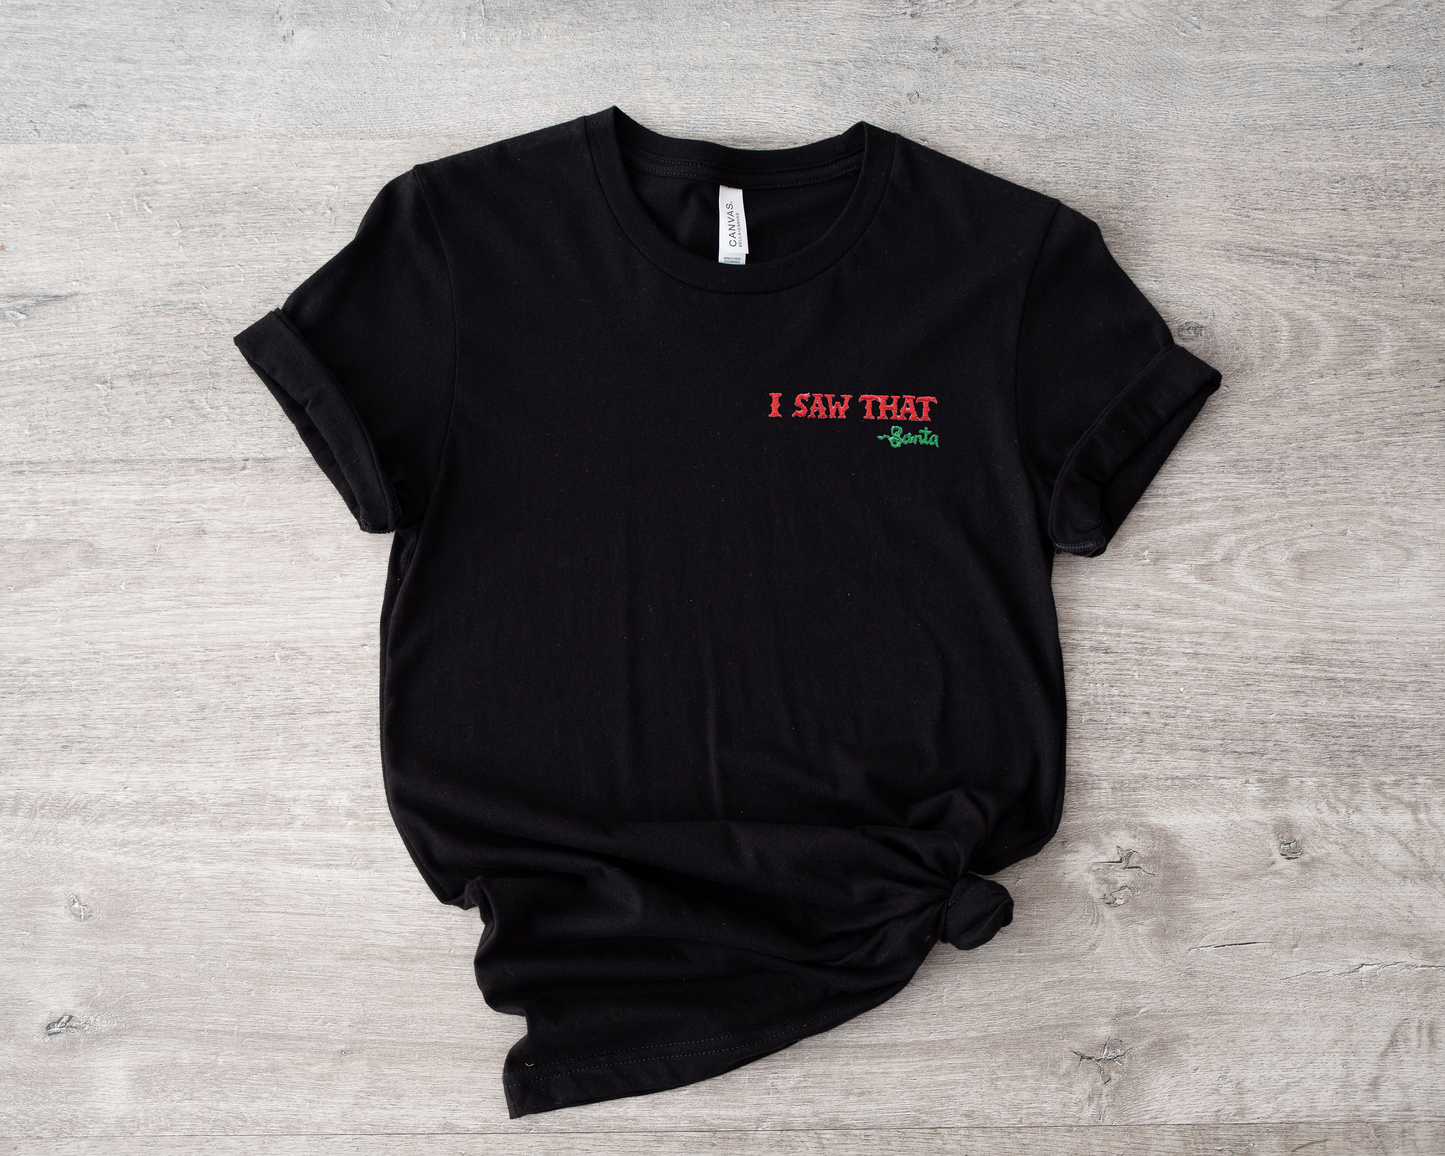 I Saw That Santa Quote Embroidered Adult Unisex Shirt